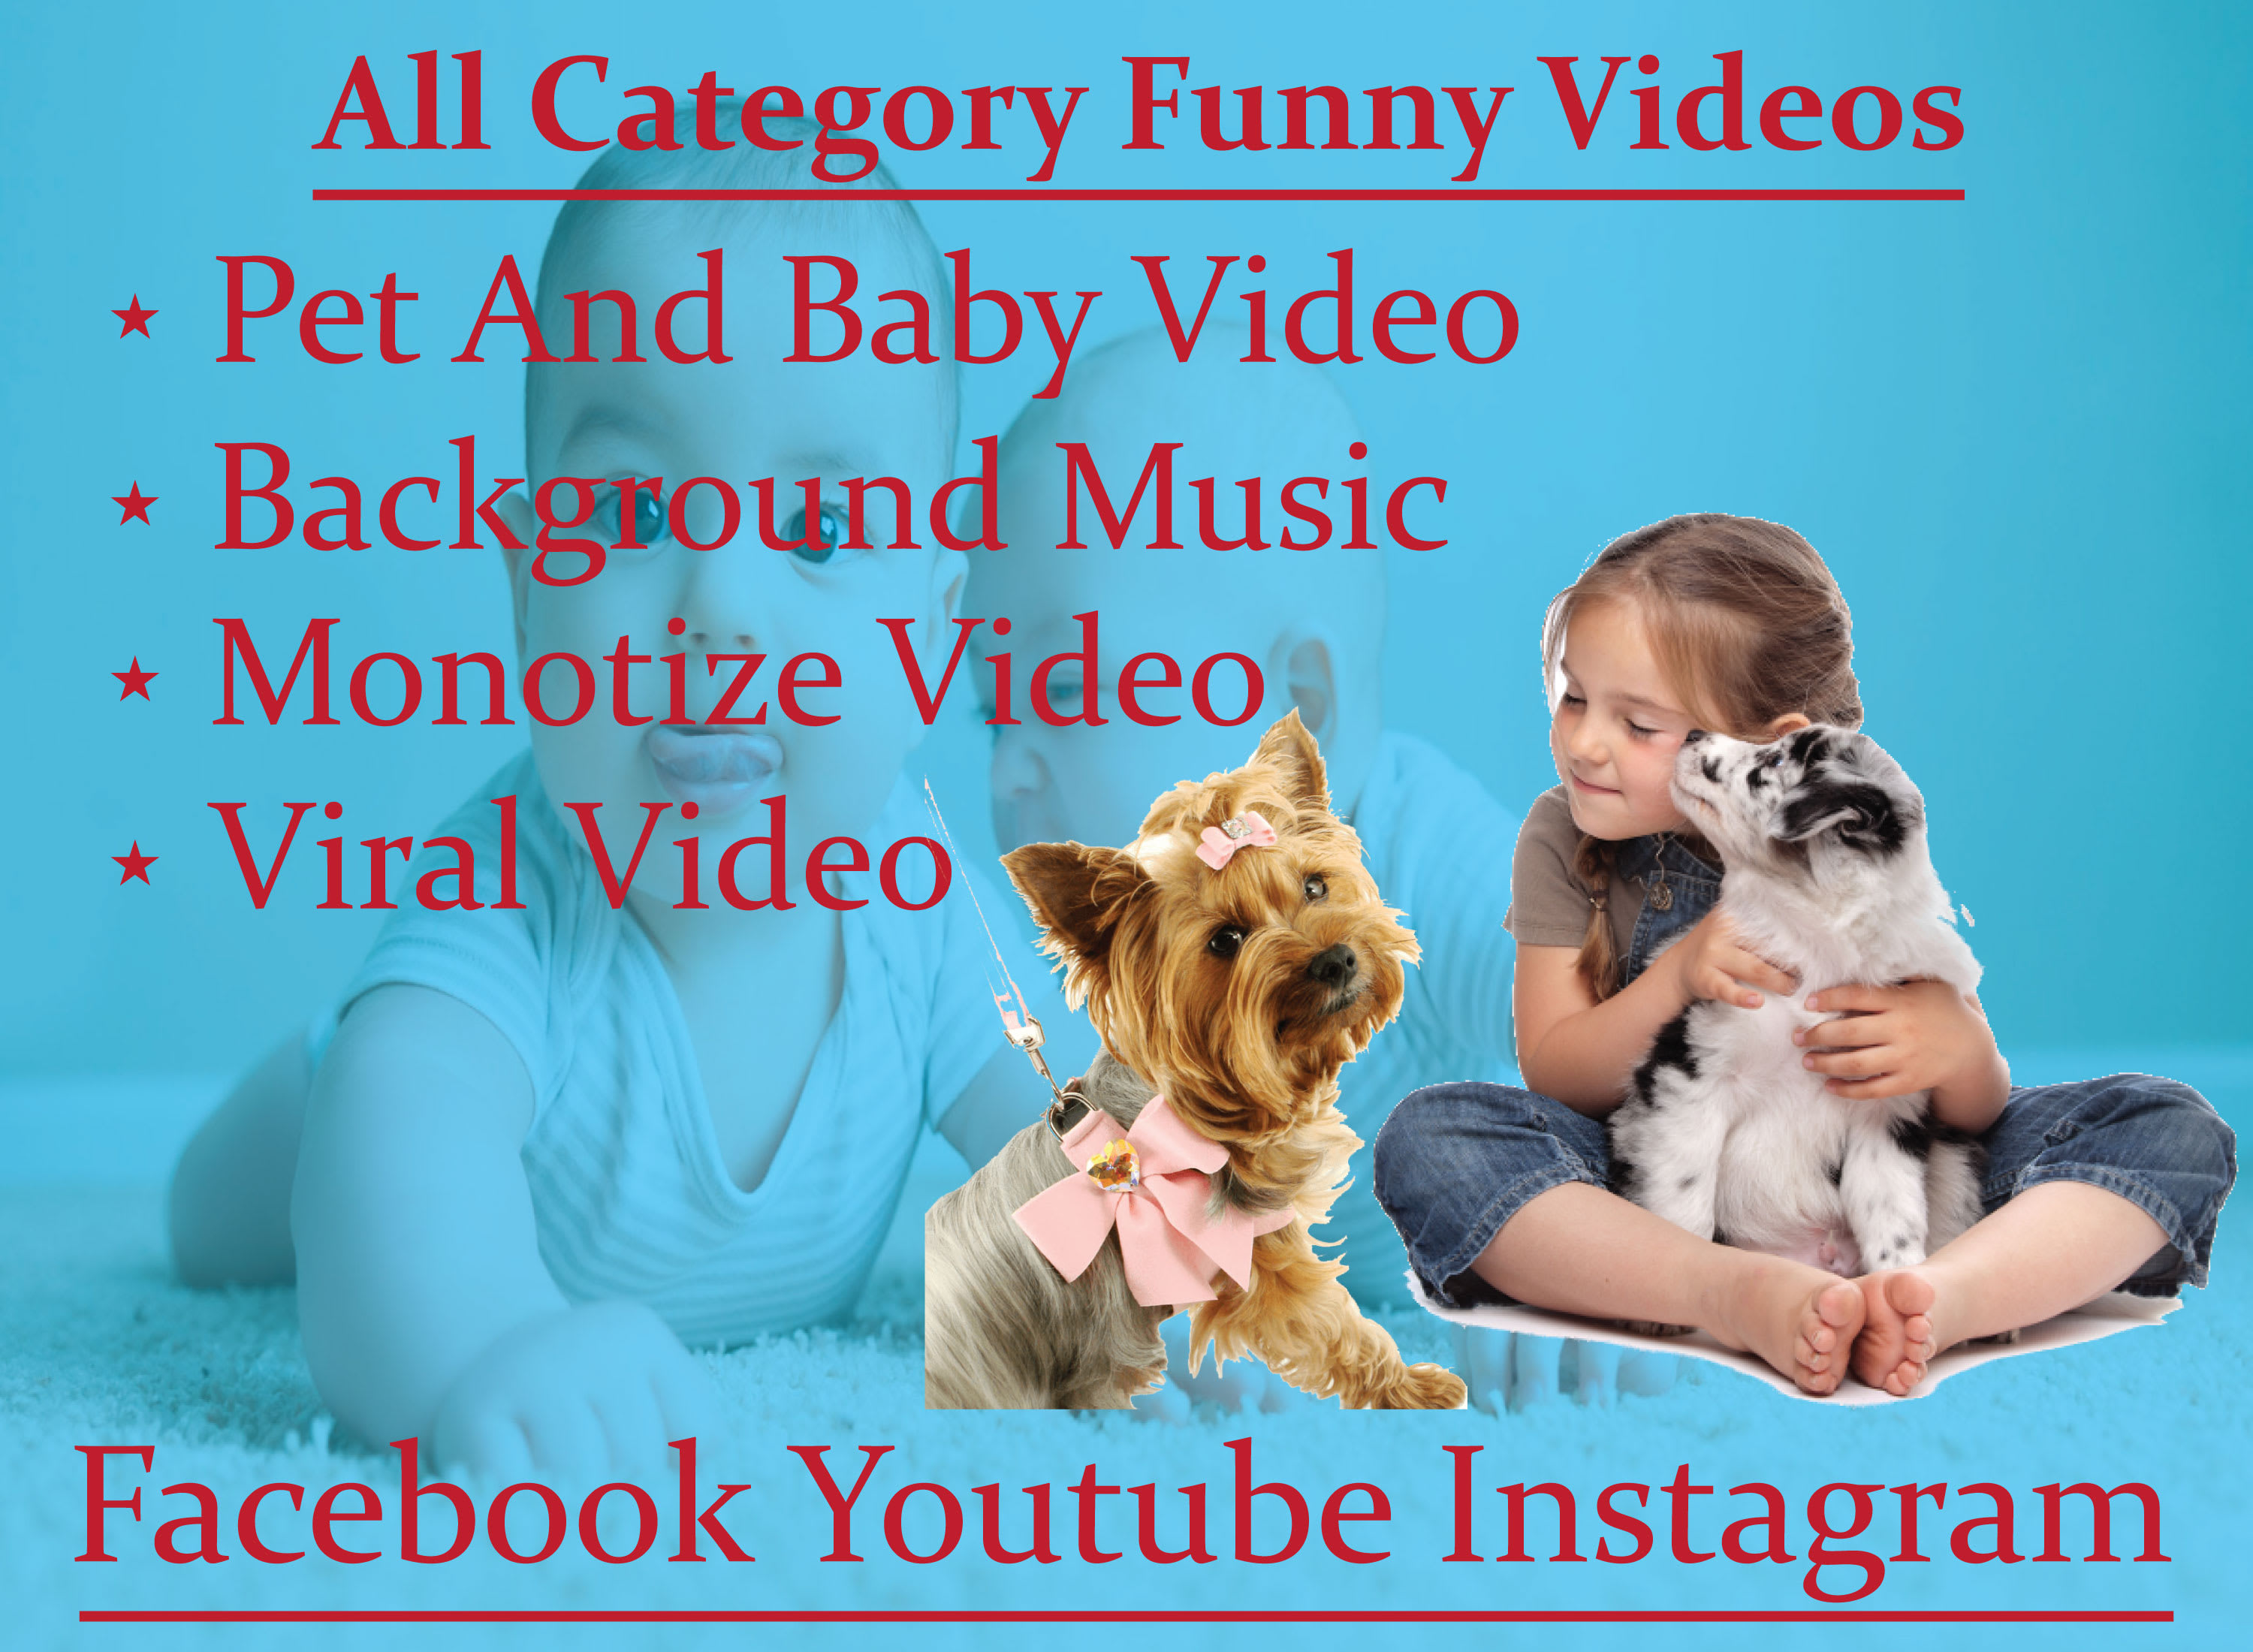 Do all kind of funny video free copyright for youtube facebook and  instagram by Sanianoreen884 | Fiverr